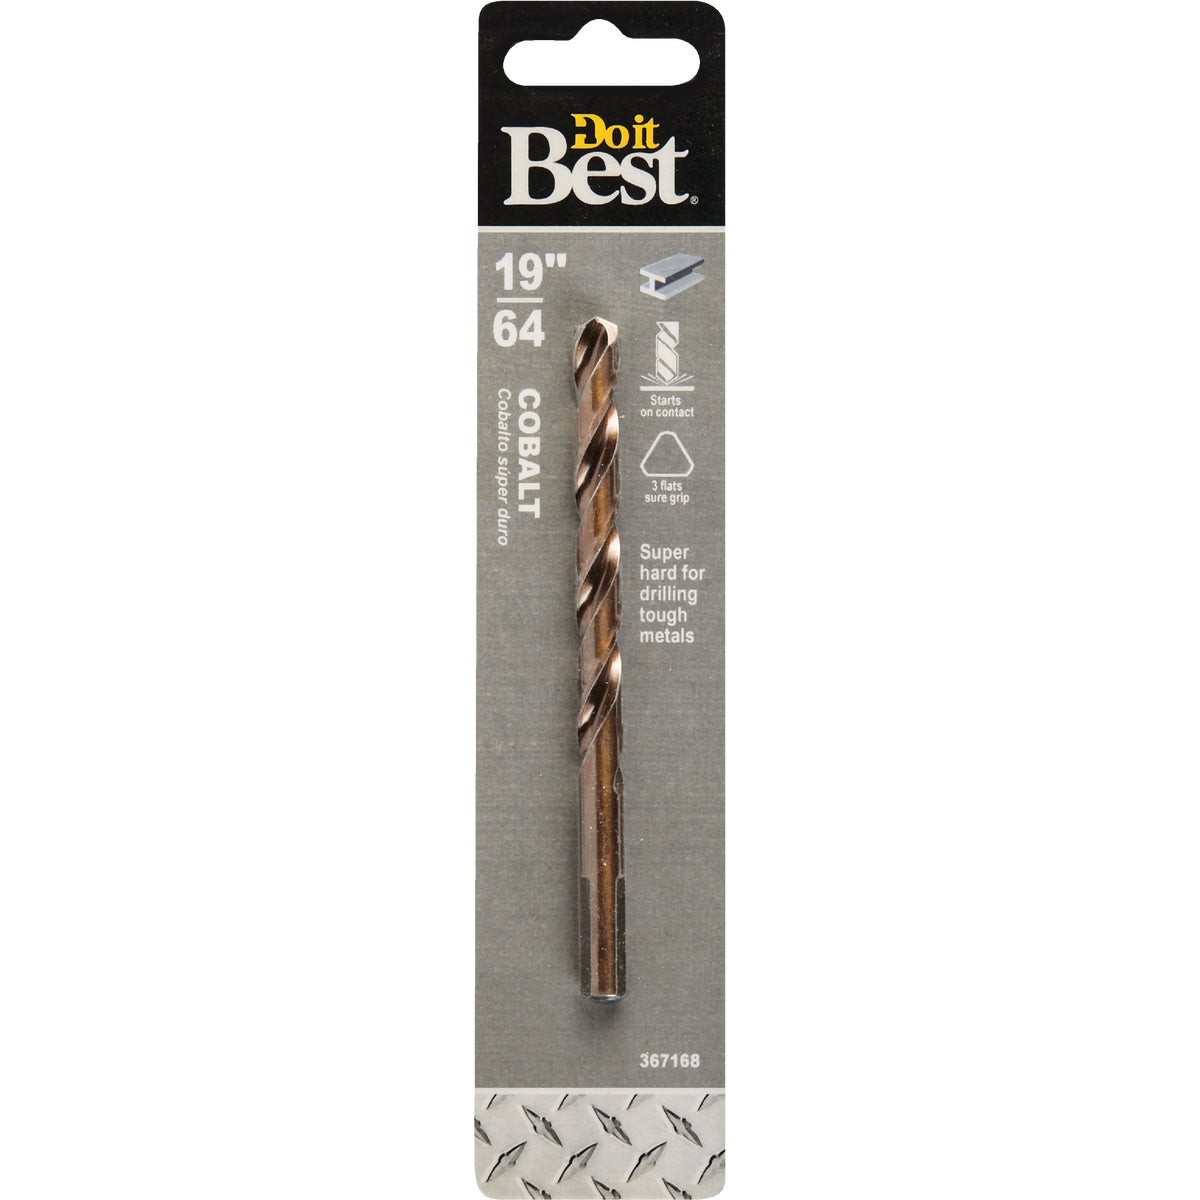 Item 367168, Industrial quality cobalt drill bits are designed for drilling in hard 